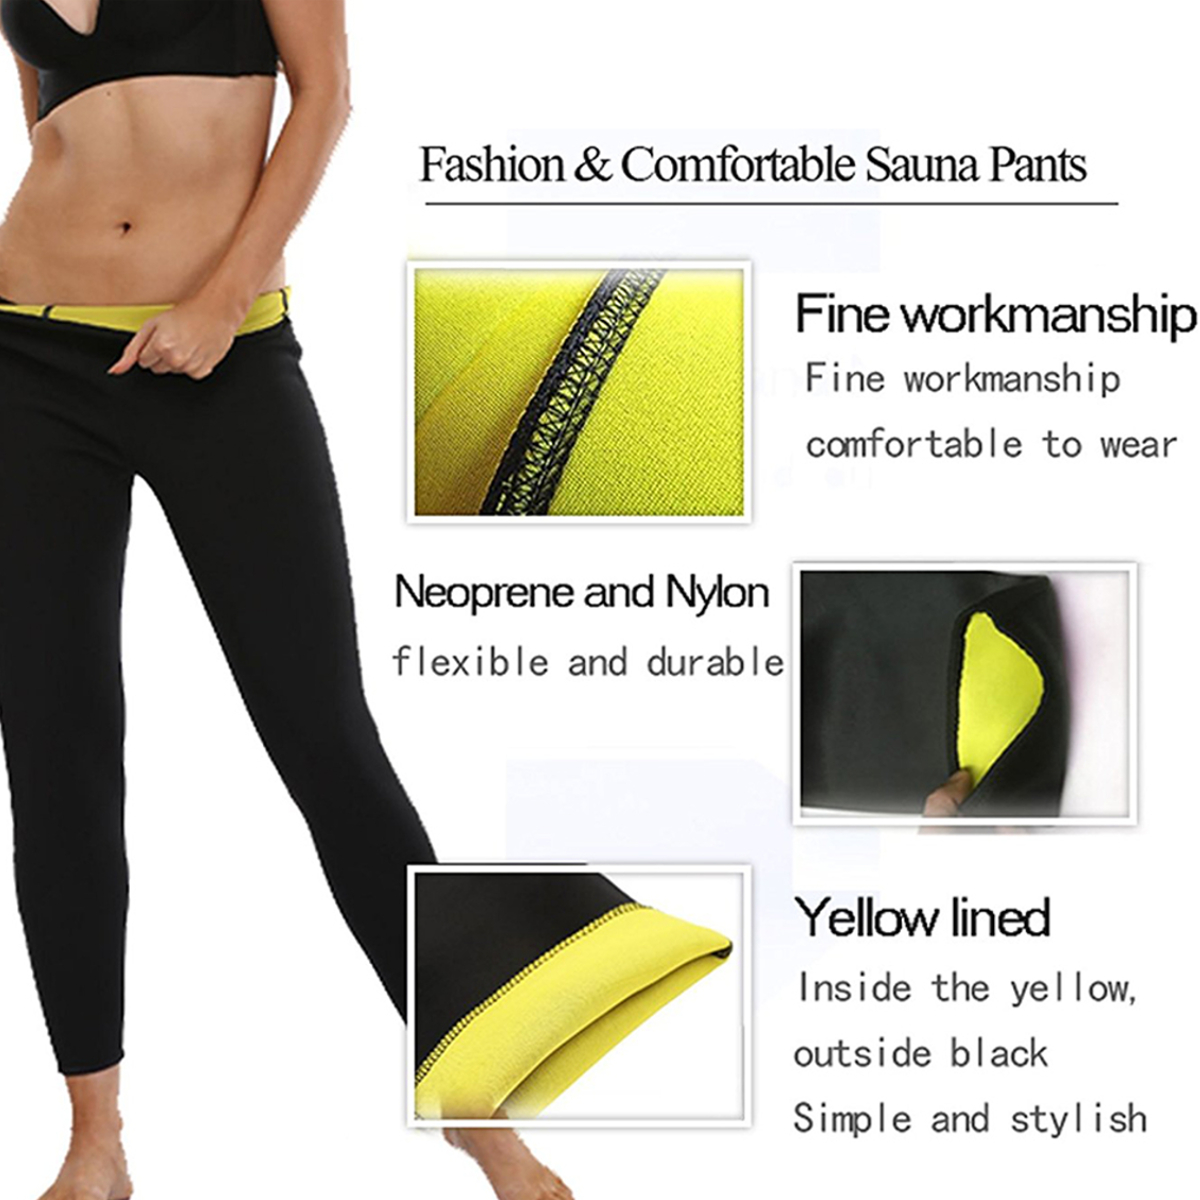 Unisex-Neoprene-Hot-Body-Accelerate-Sweating-Slimming-Fitness-Trousers-Yoga-Sports-Pants-1447219-4